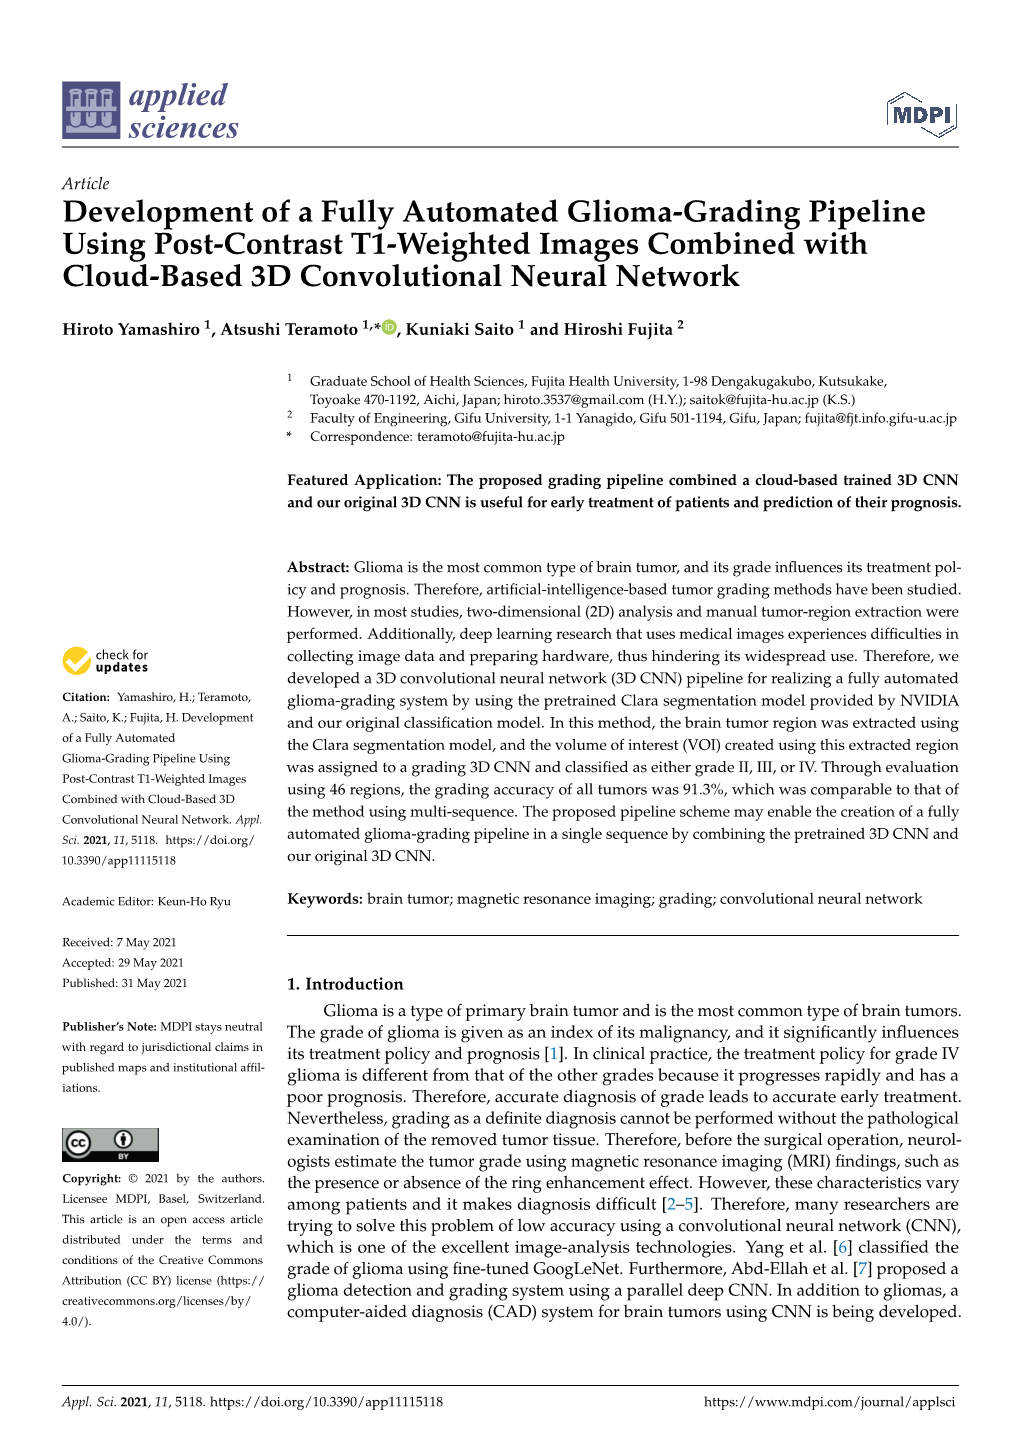 Development of a Fully Automated Glioma-Grading Pipeline Using Post-Contrast T1-Weighted Images Combined with Cloud-Based 3D Convolutional Neural Network